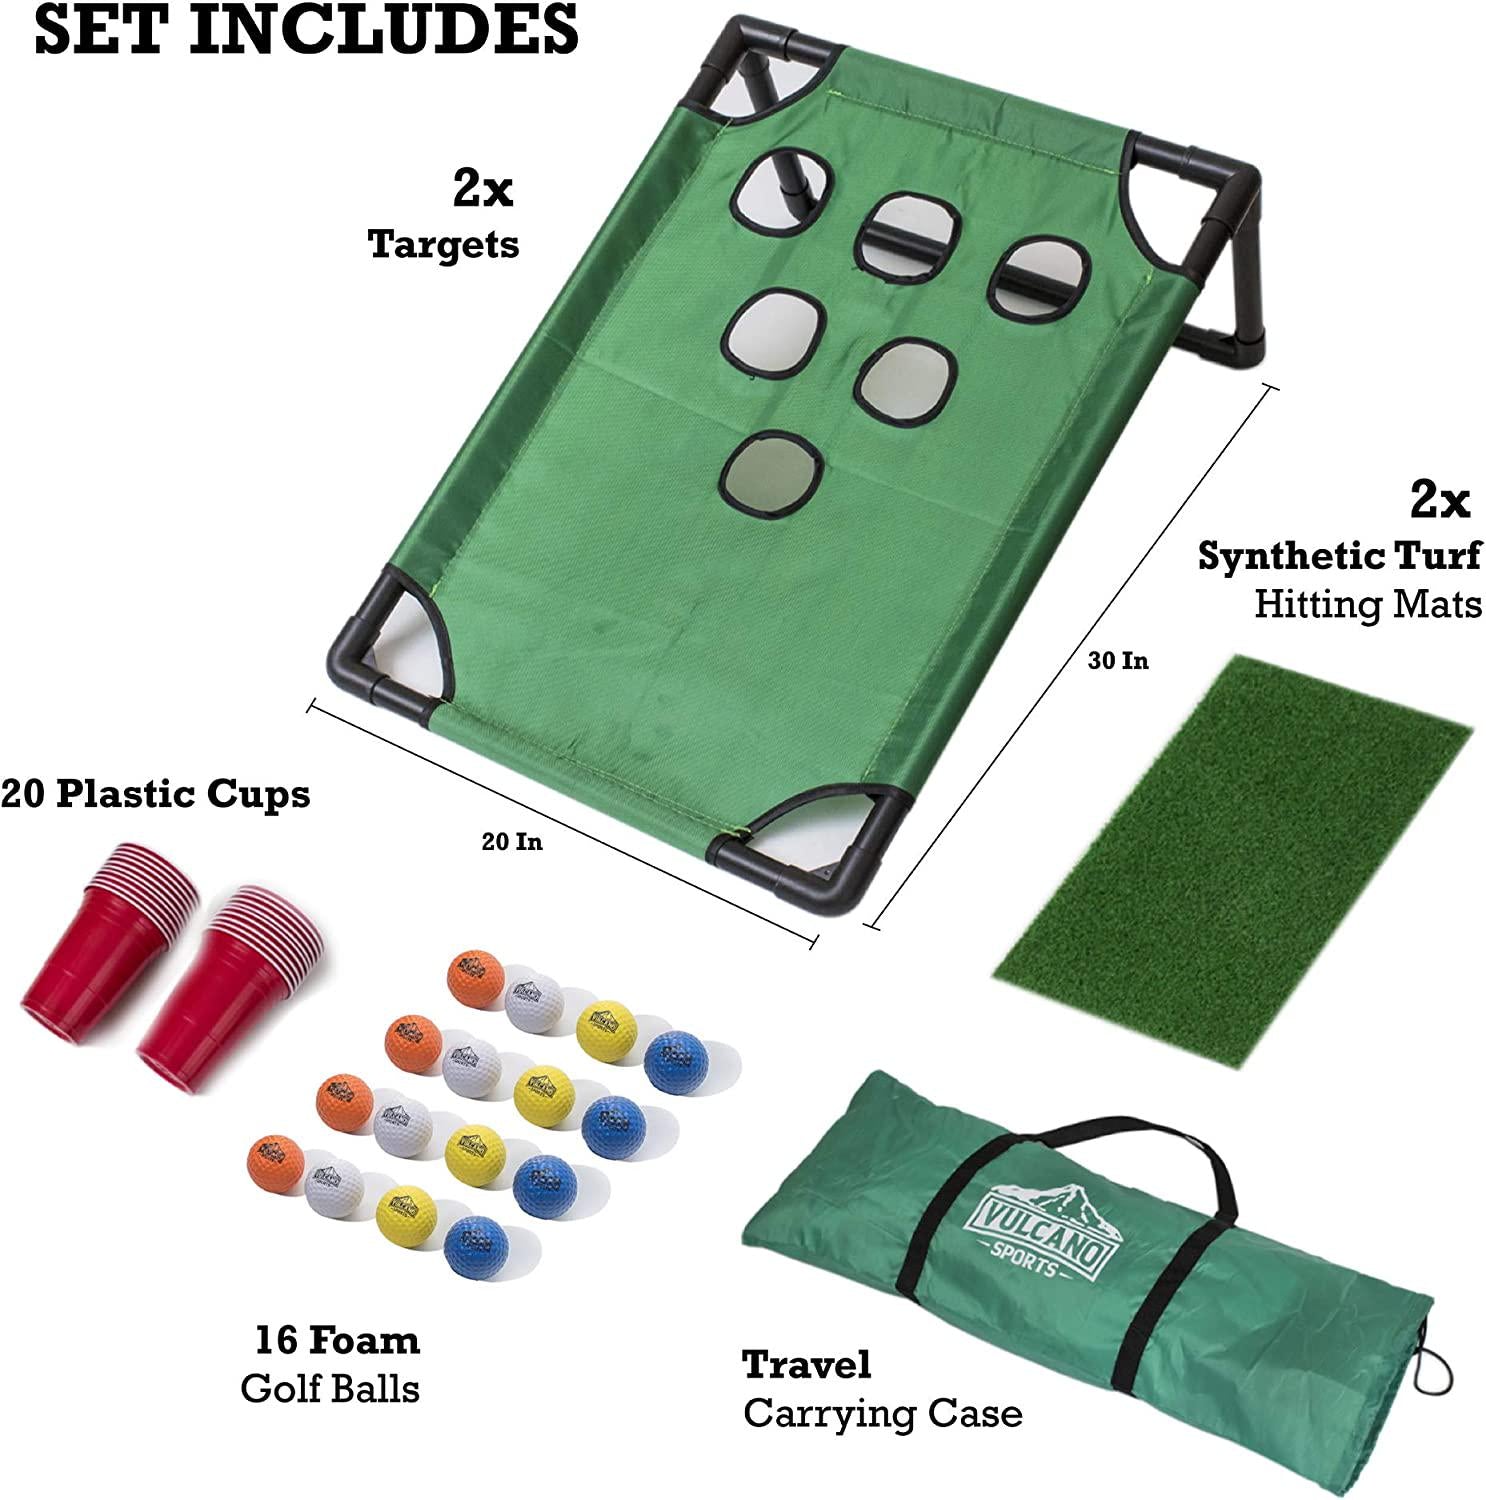 VULCANO SPORTS, Golf Pong Game Set, Best in Outdoor Games, Backyard Games for Adults, Golf Chipping Game, Golf Gifts for Men, Best in Yard Games, Perfect Golf Gift.